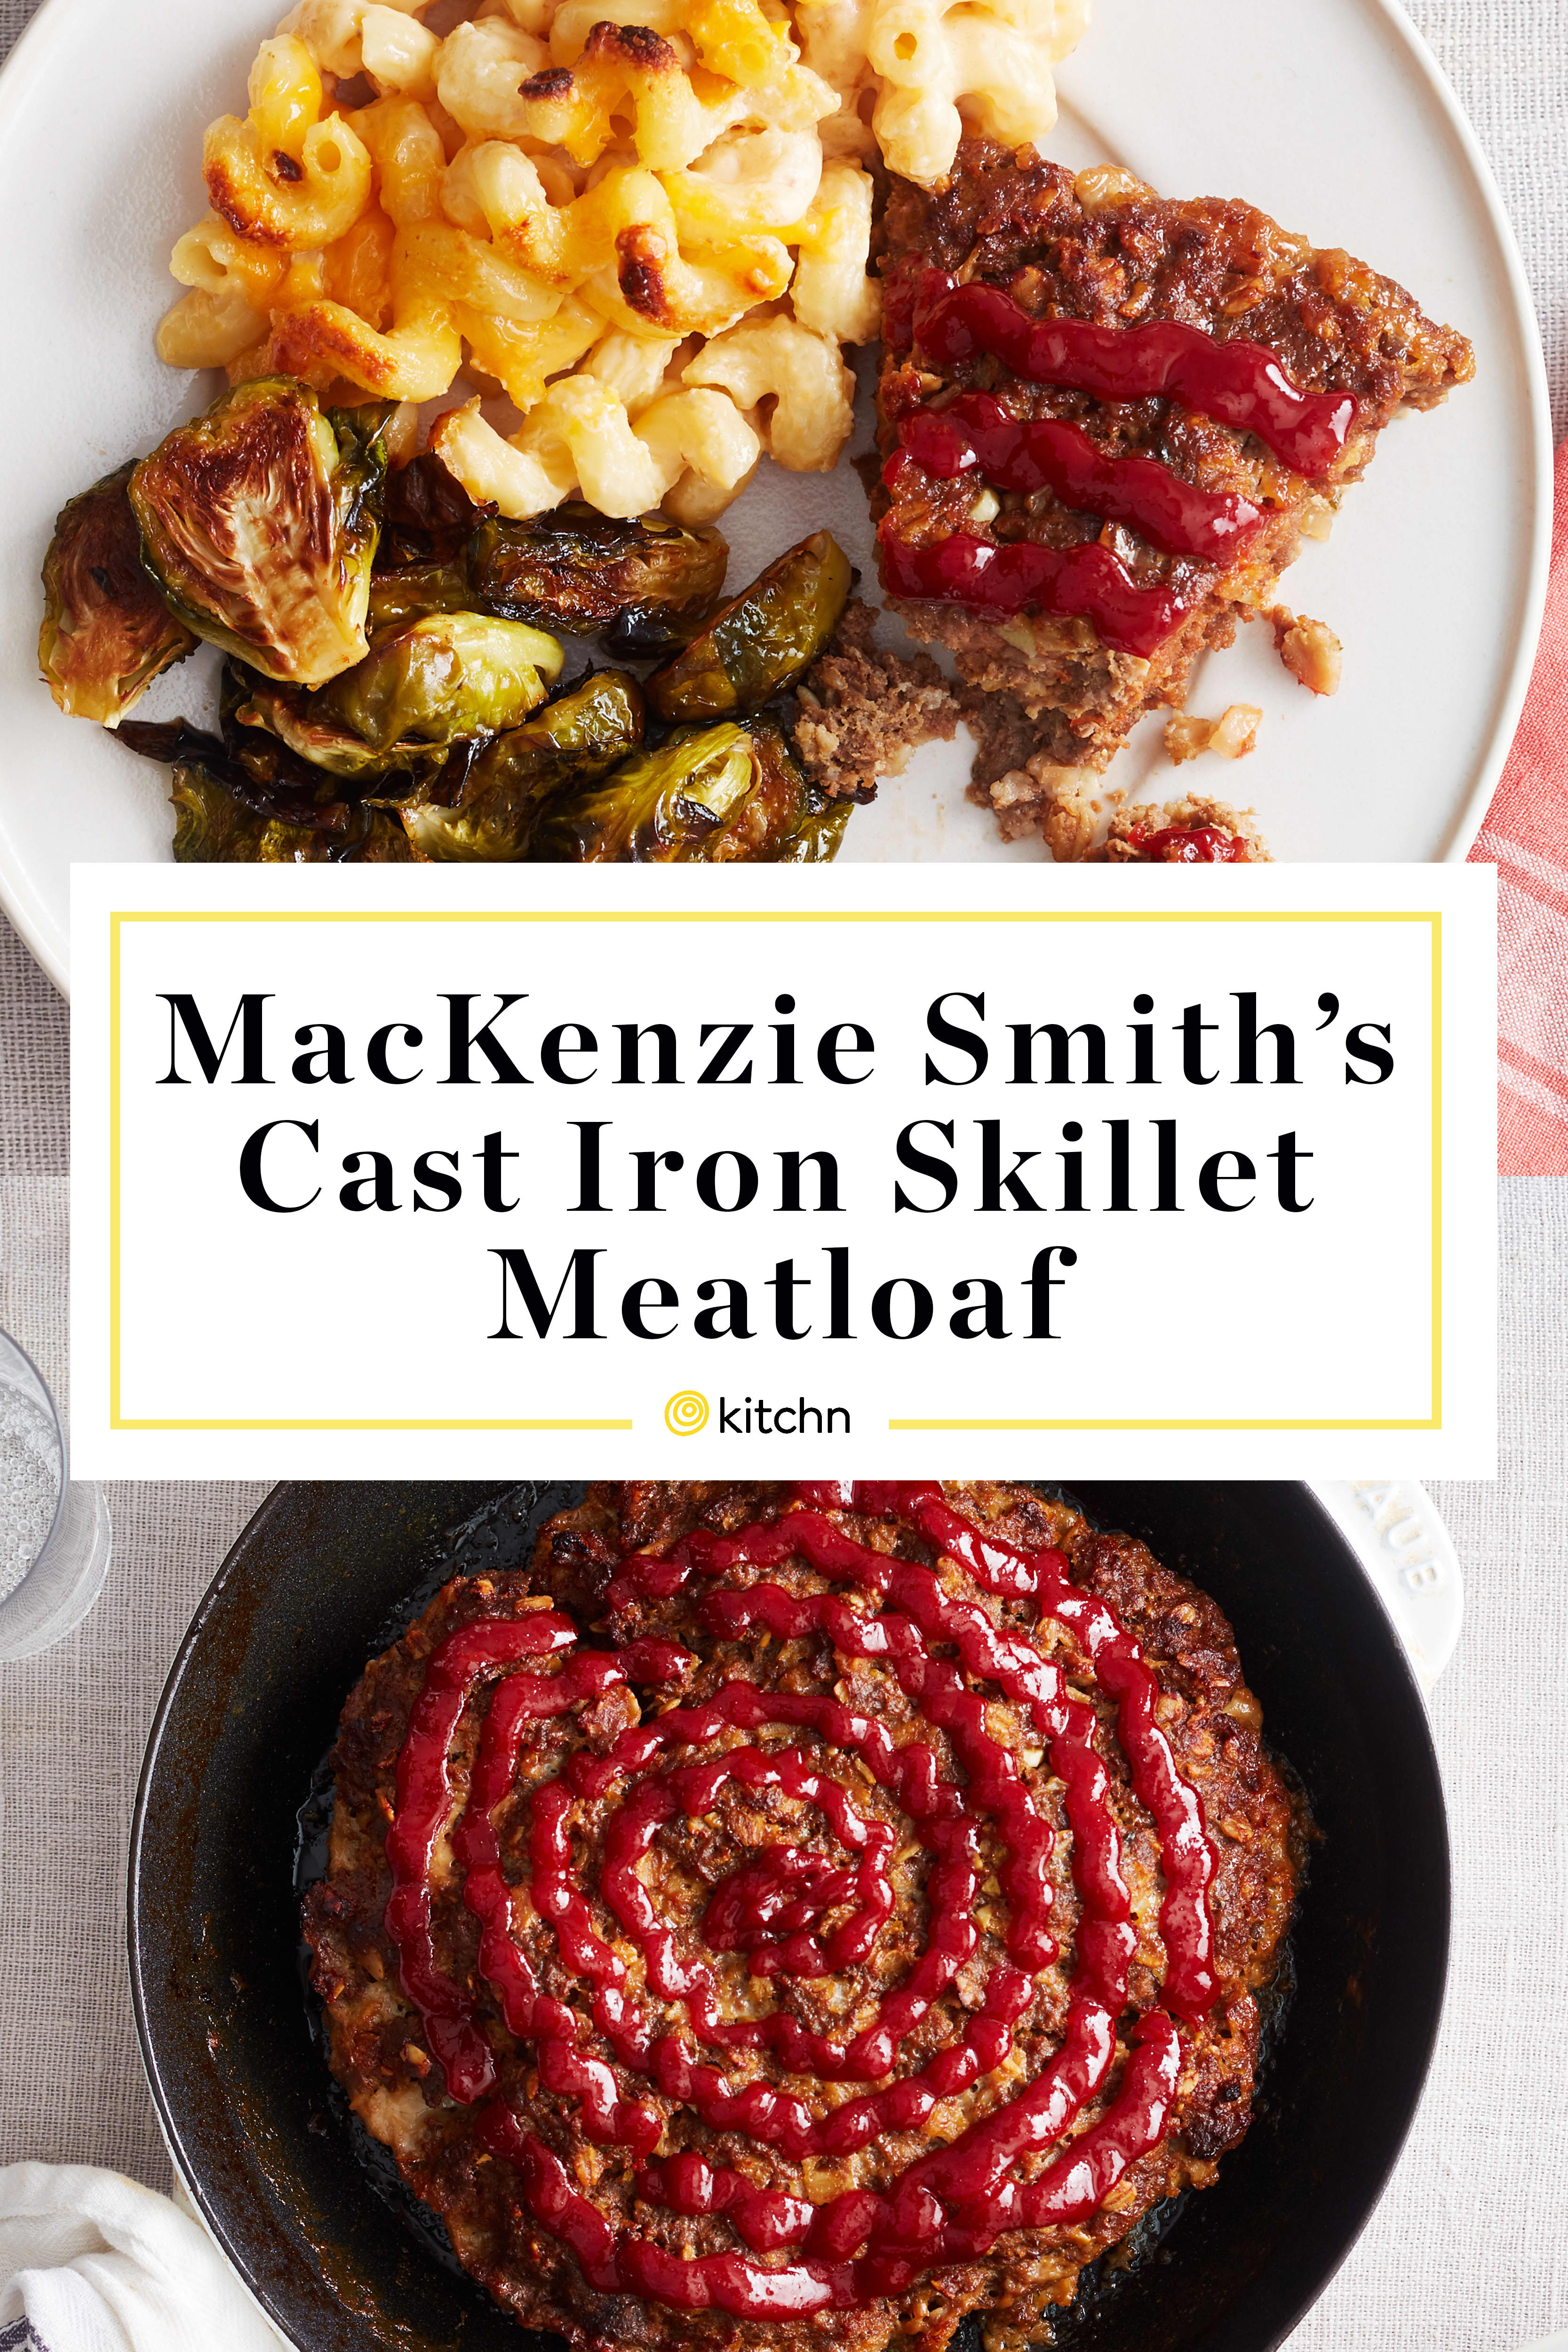 https://cdn.apartmenttherapy.info/image/upload/v1616082562/k/Photo/Recipes/2021-03-sunday-dinner-meatloaf-mac-and-cheese/mackenziesmithscastironskilletmeatloaf.jpg